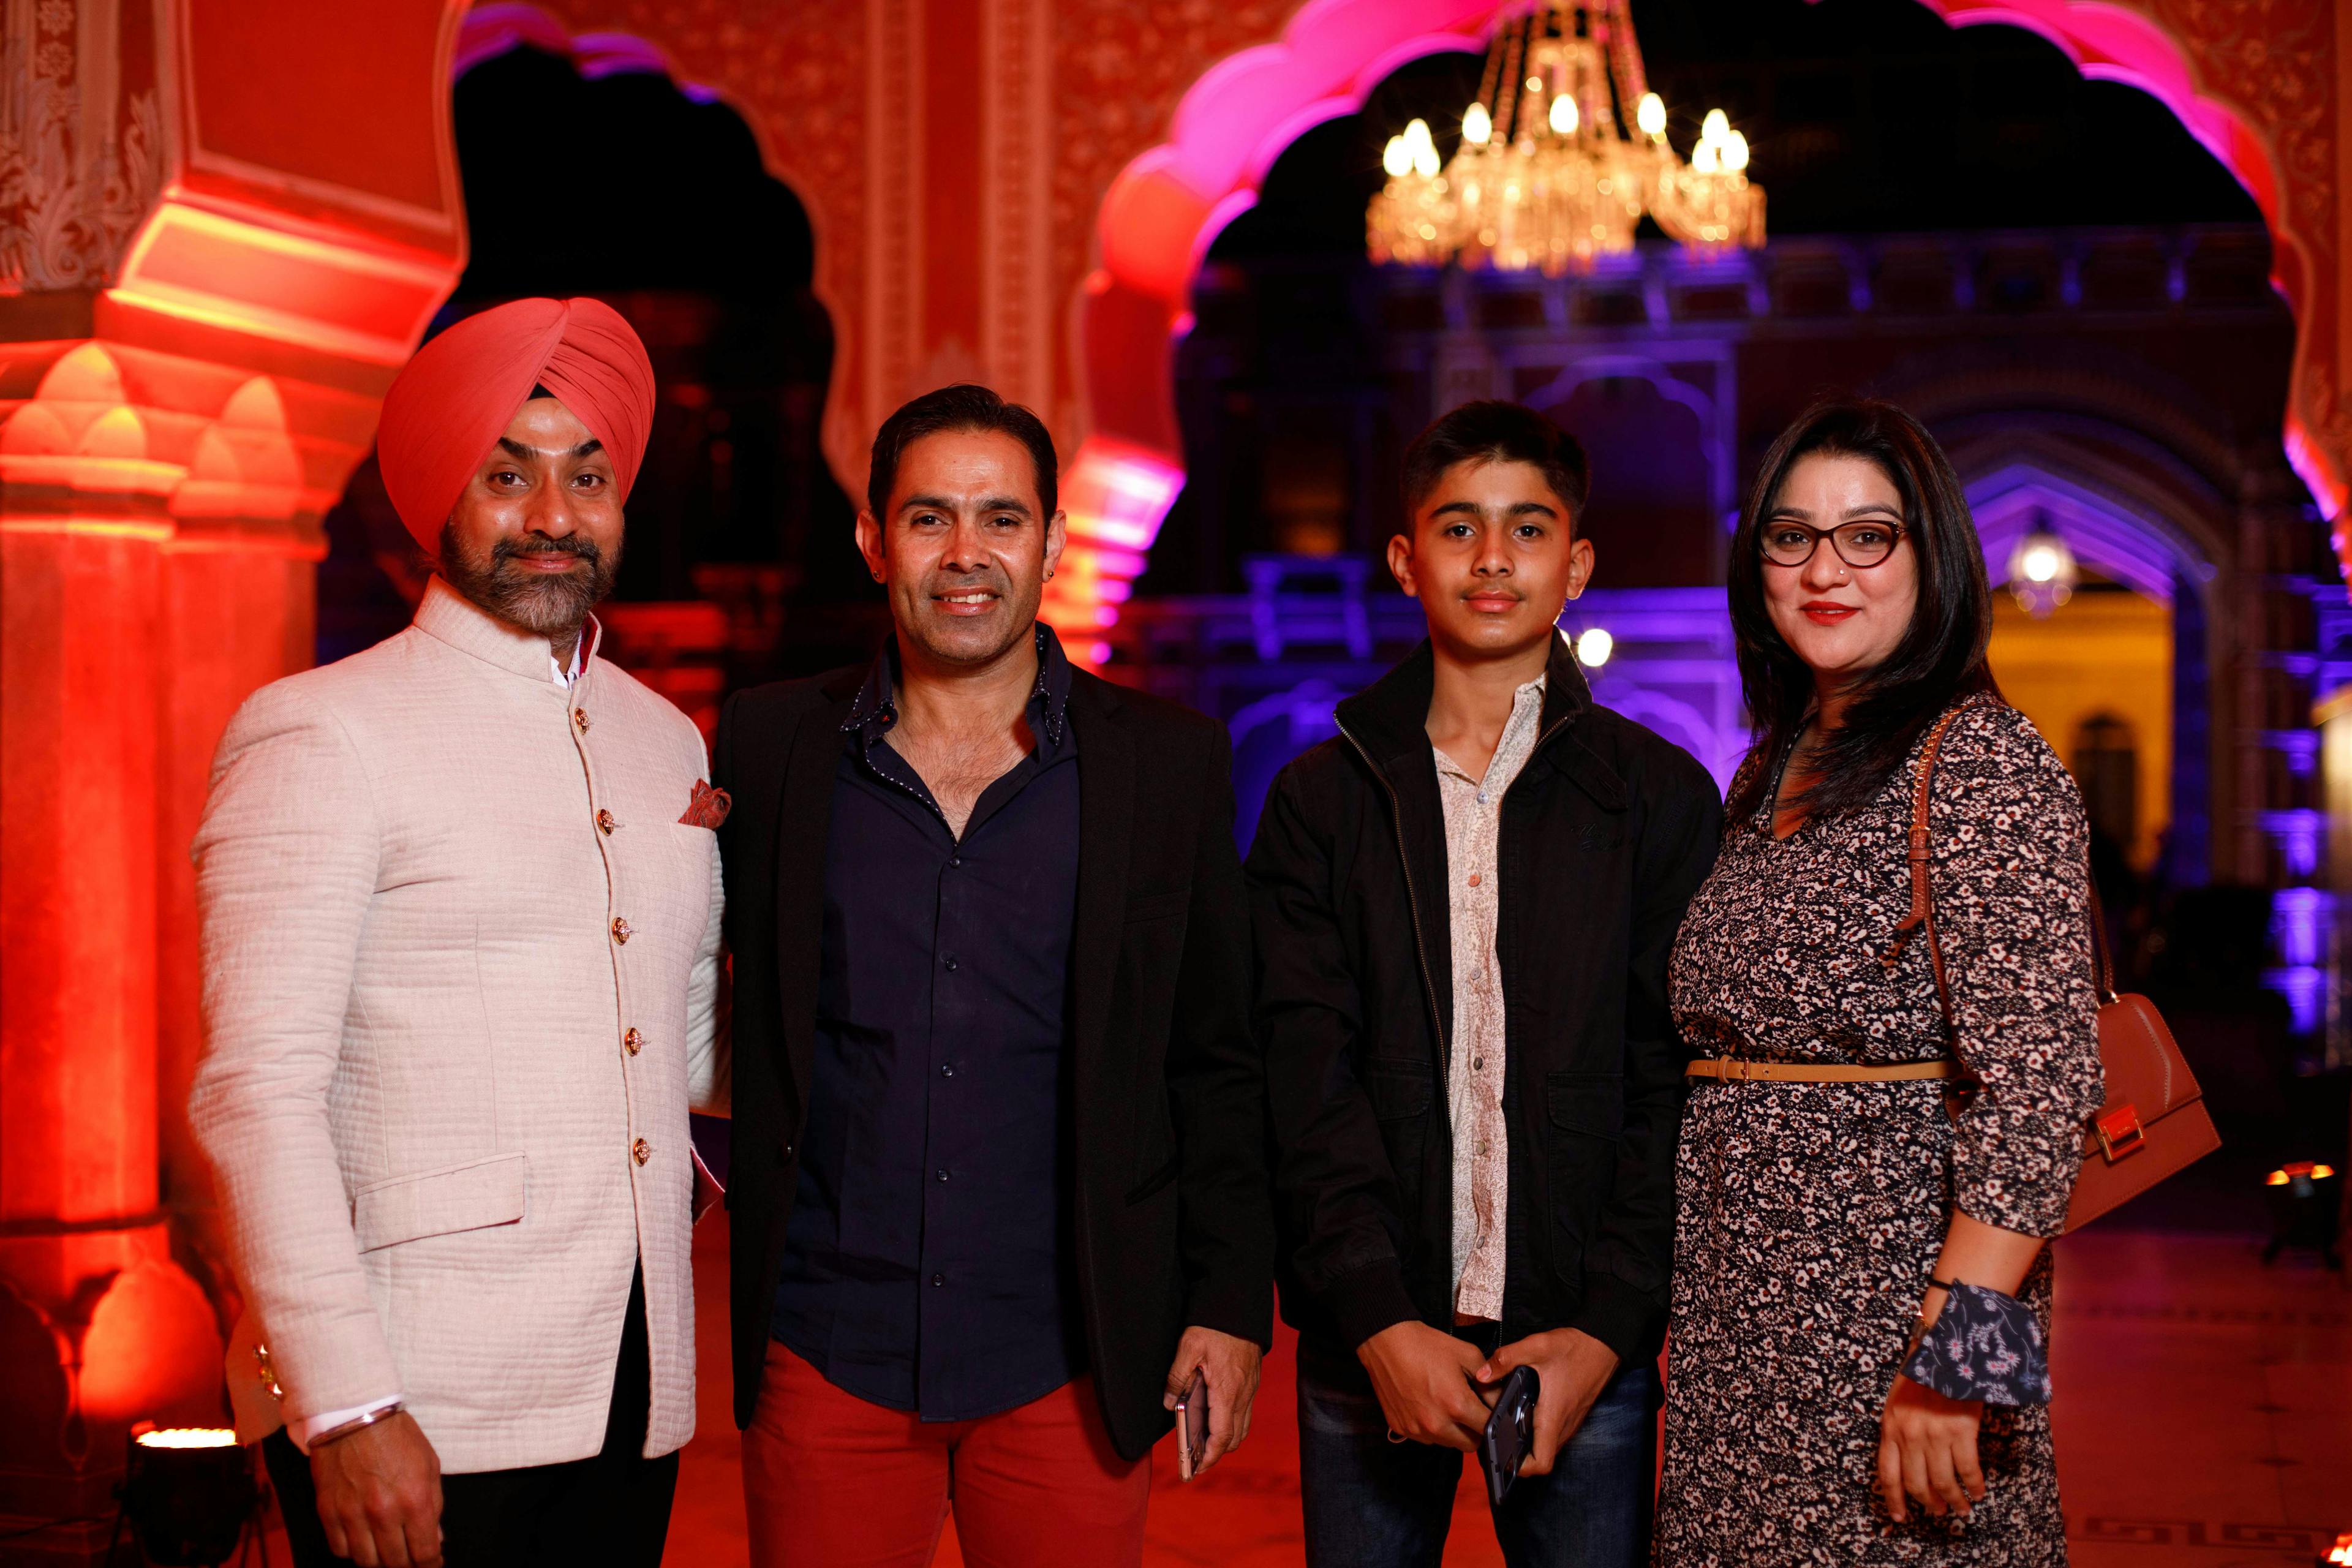 Mr. Maninder Sethi, Editor-In-Chief of LA POLO and the ace player Dhruvpal Godara pose with family